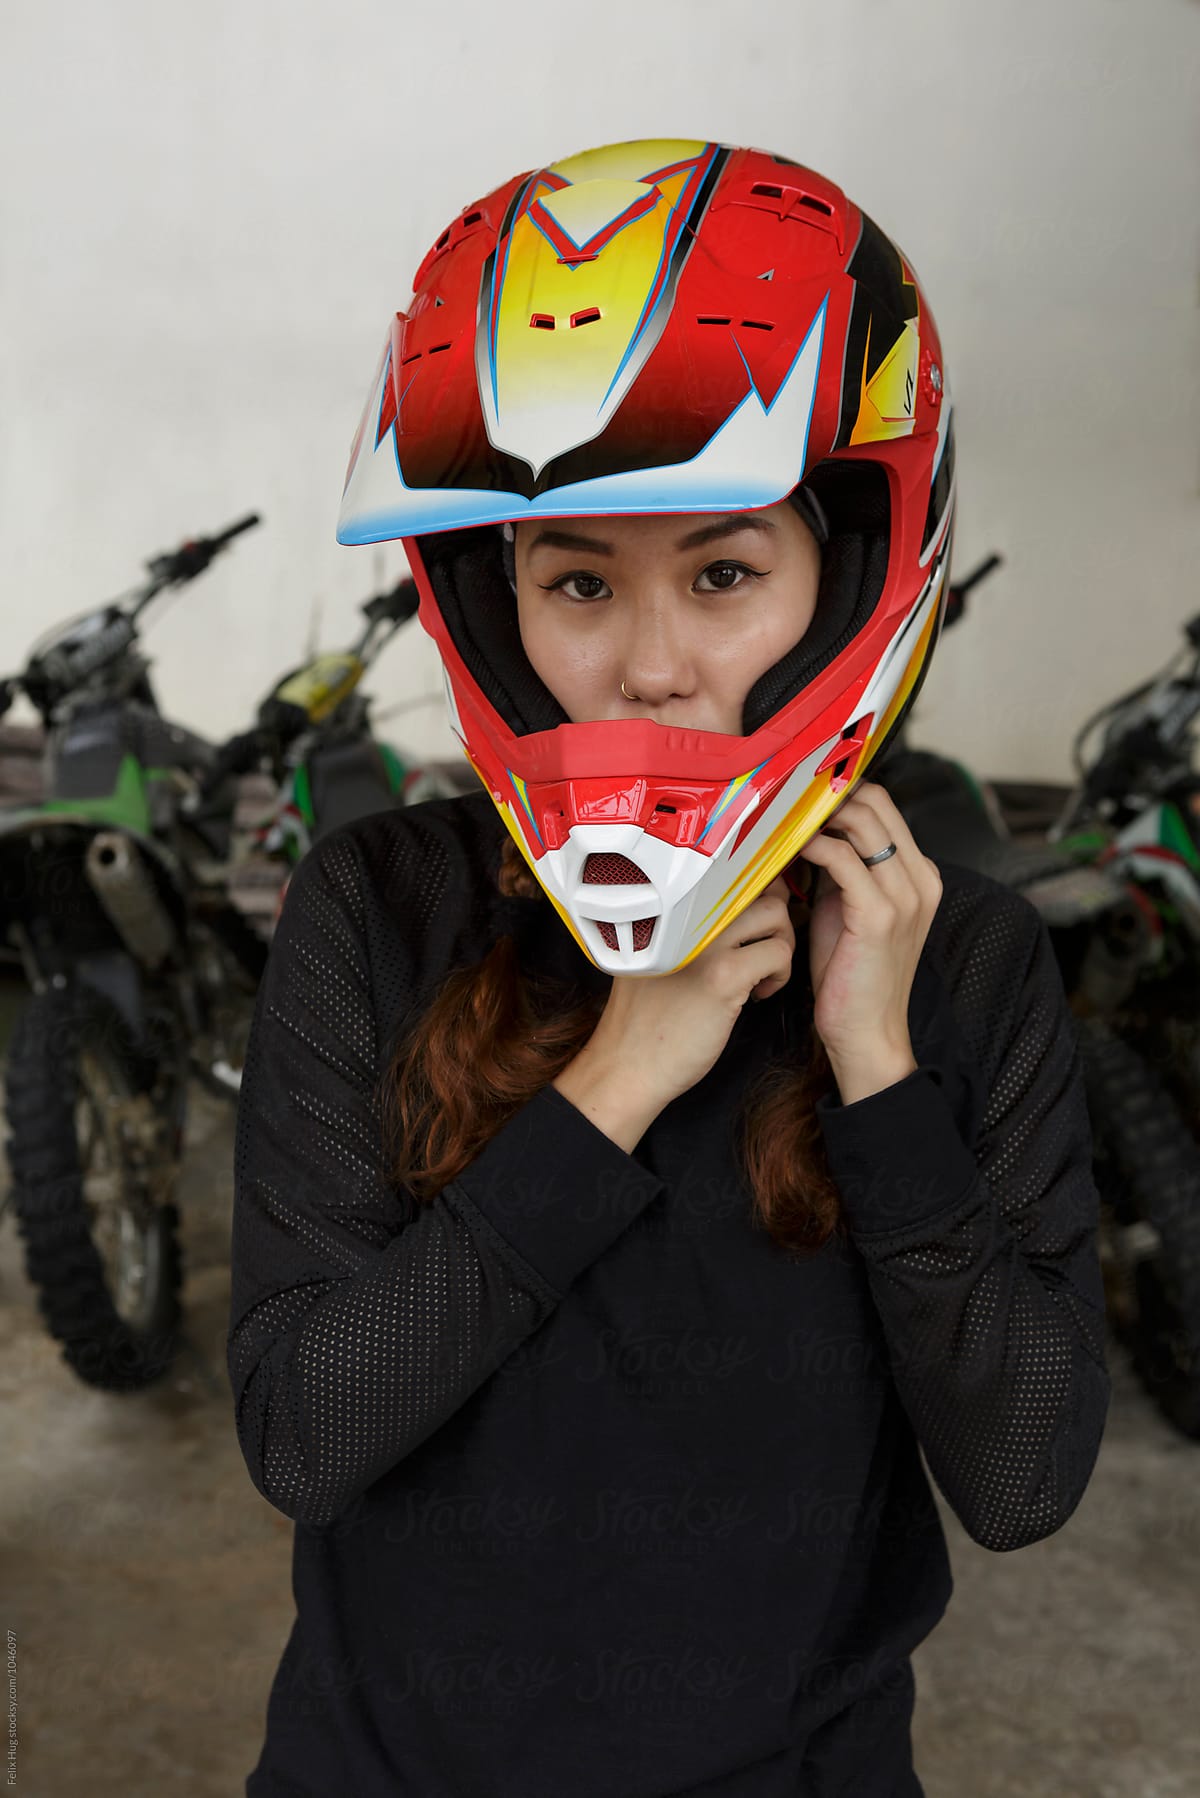 An asian woman is putting on the helmet for her motocross adventure. Behind her we some bikes.